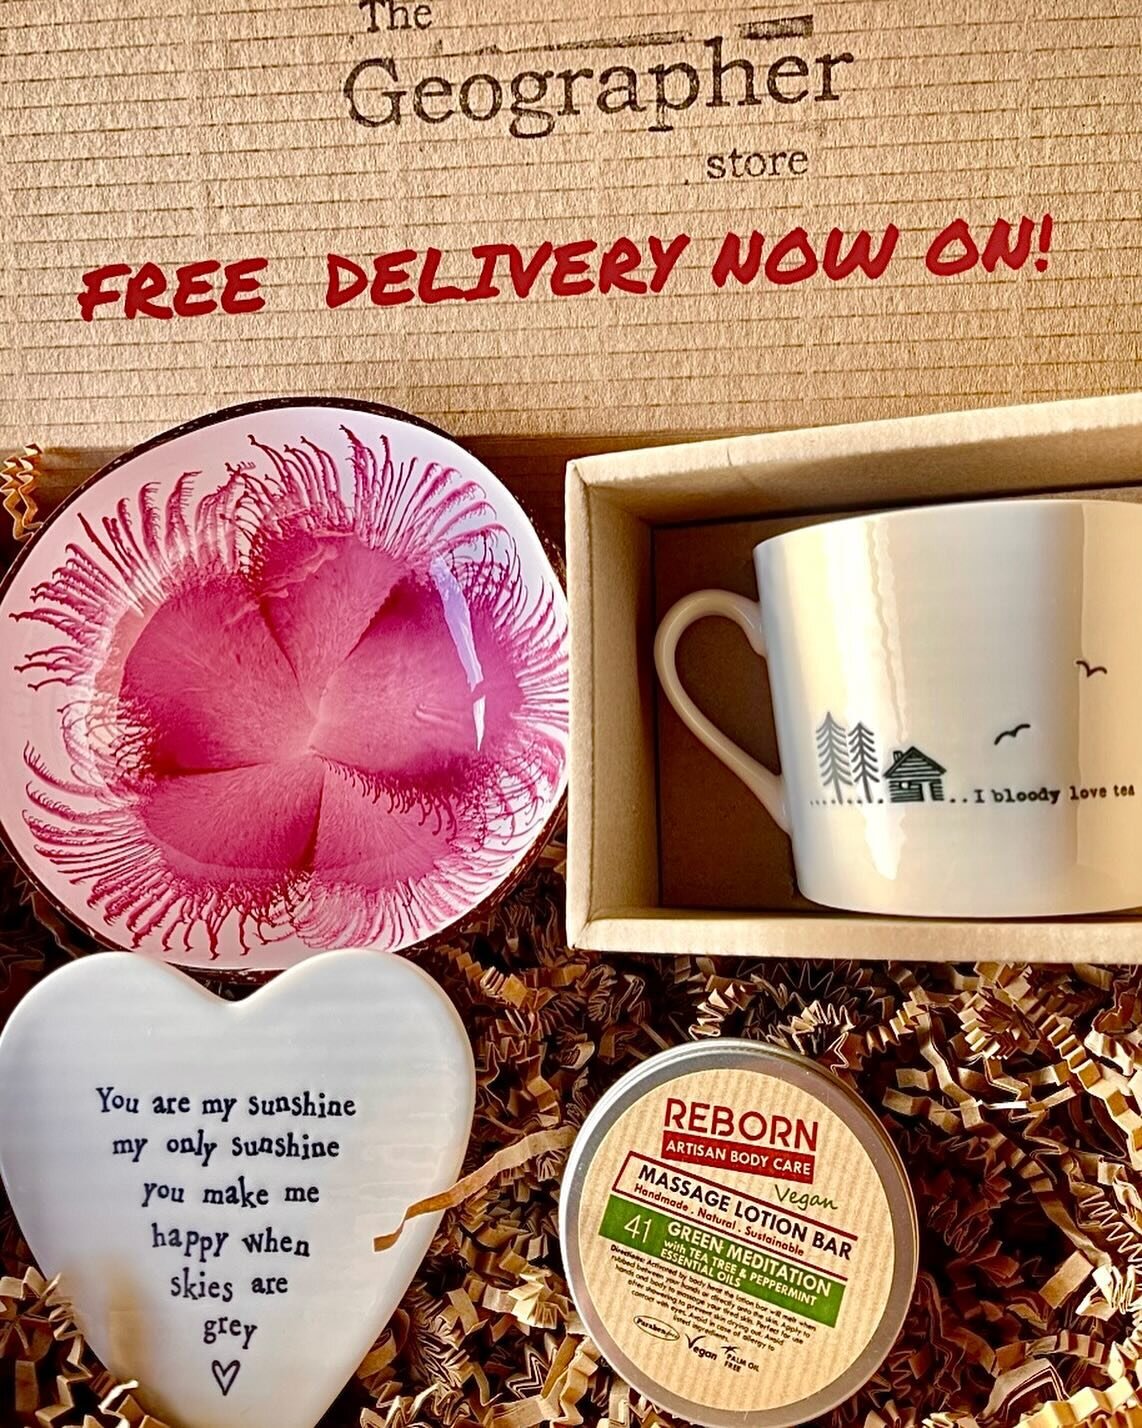 Just a quick reminder of this week&rsquo;s special offer!

Simply use code FREEDELIVERYOFFER at checkout.

Happy shopping!
 
The Geographer 🌍 ethical and eco-conscious gifting 🌱 sustainably packaged 
.
.
.
.
.
.
#thegeographer #giftbox #makeyourown